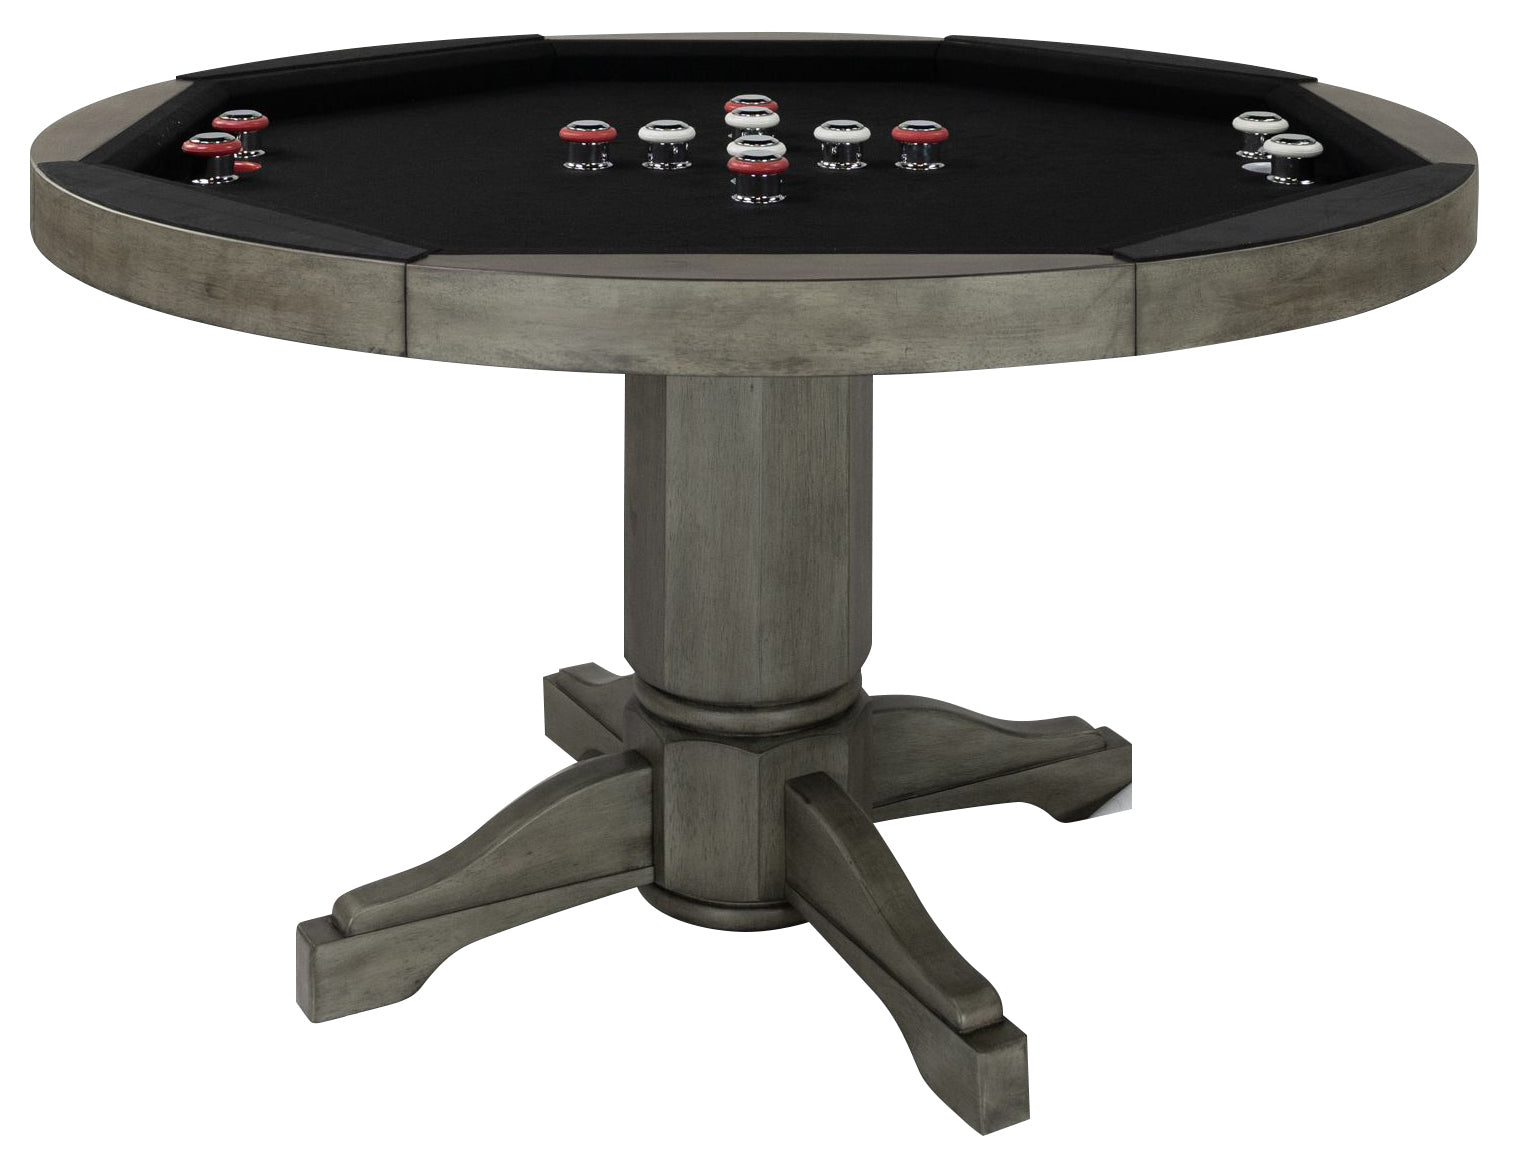 Legacy Billiards Heritage 3 in 1 Game Table with Poker, Dining and Bumper Pool in Overcast Finish